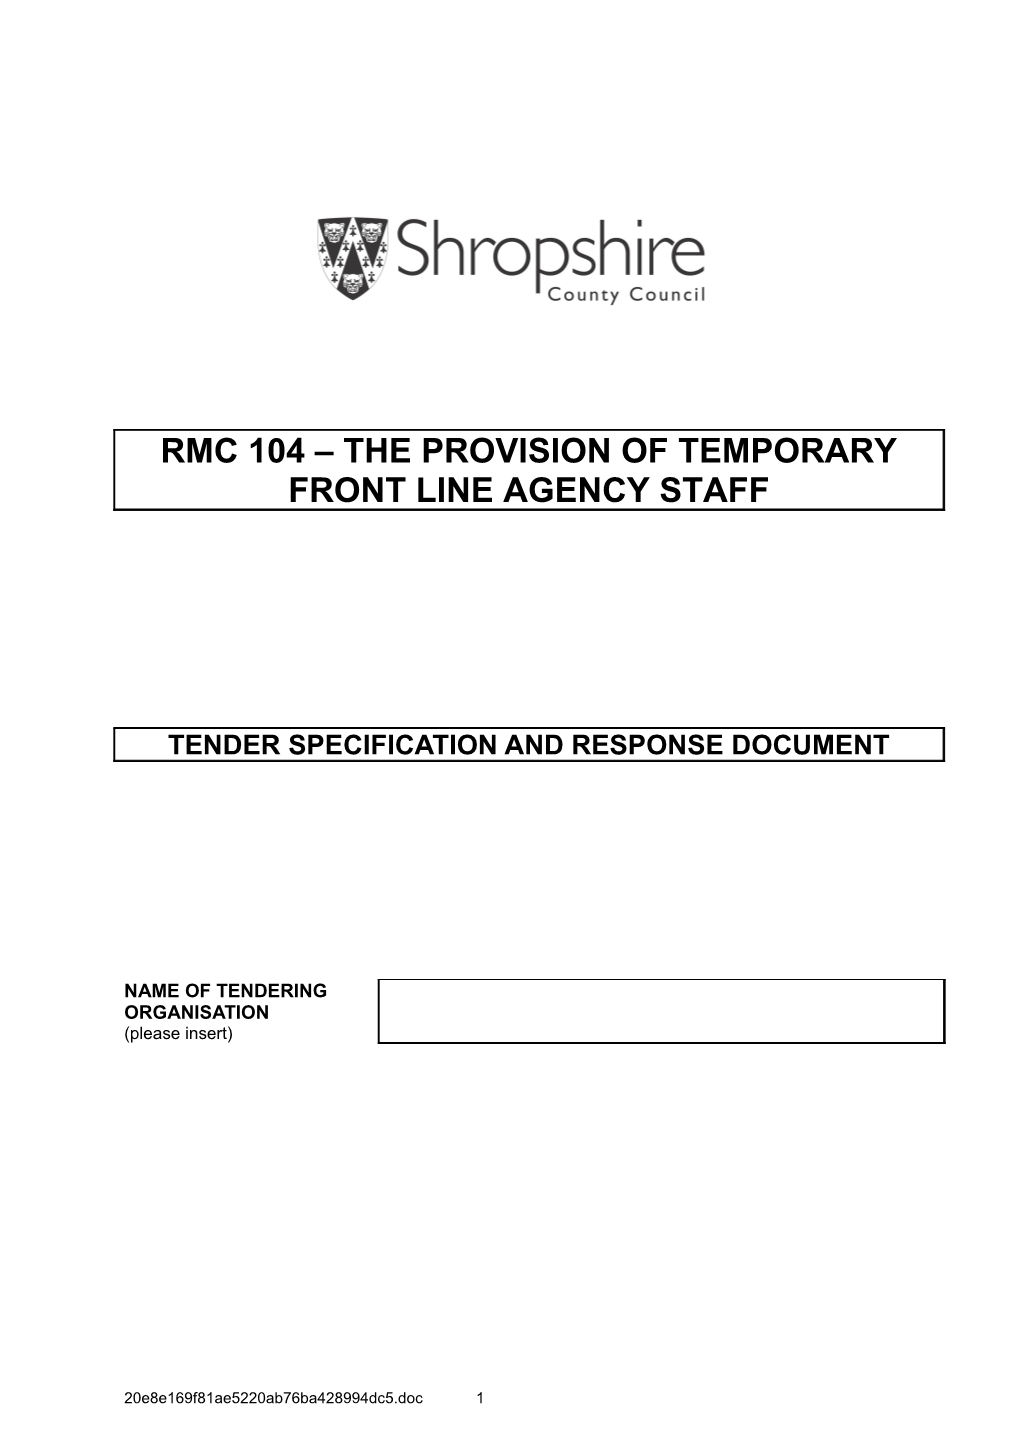 Tender Specification and Response Document